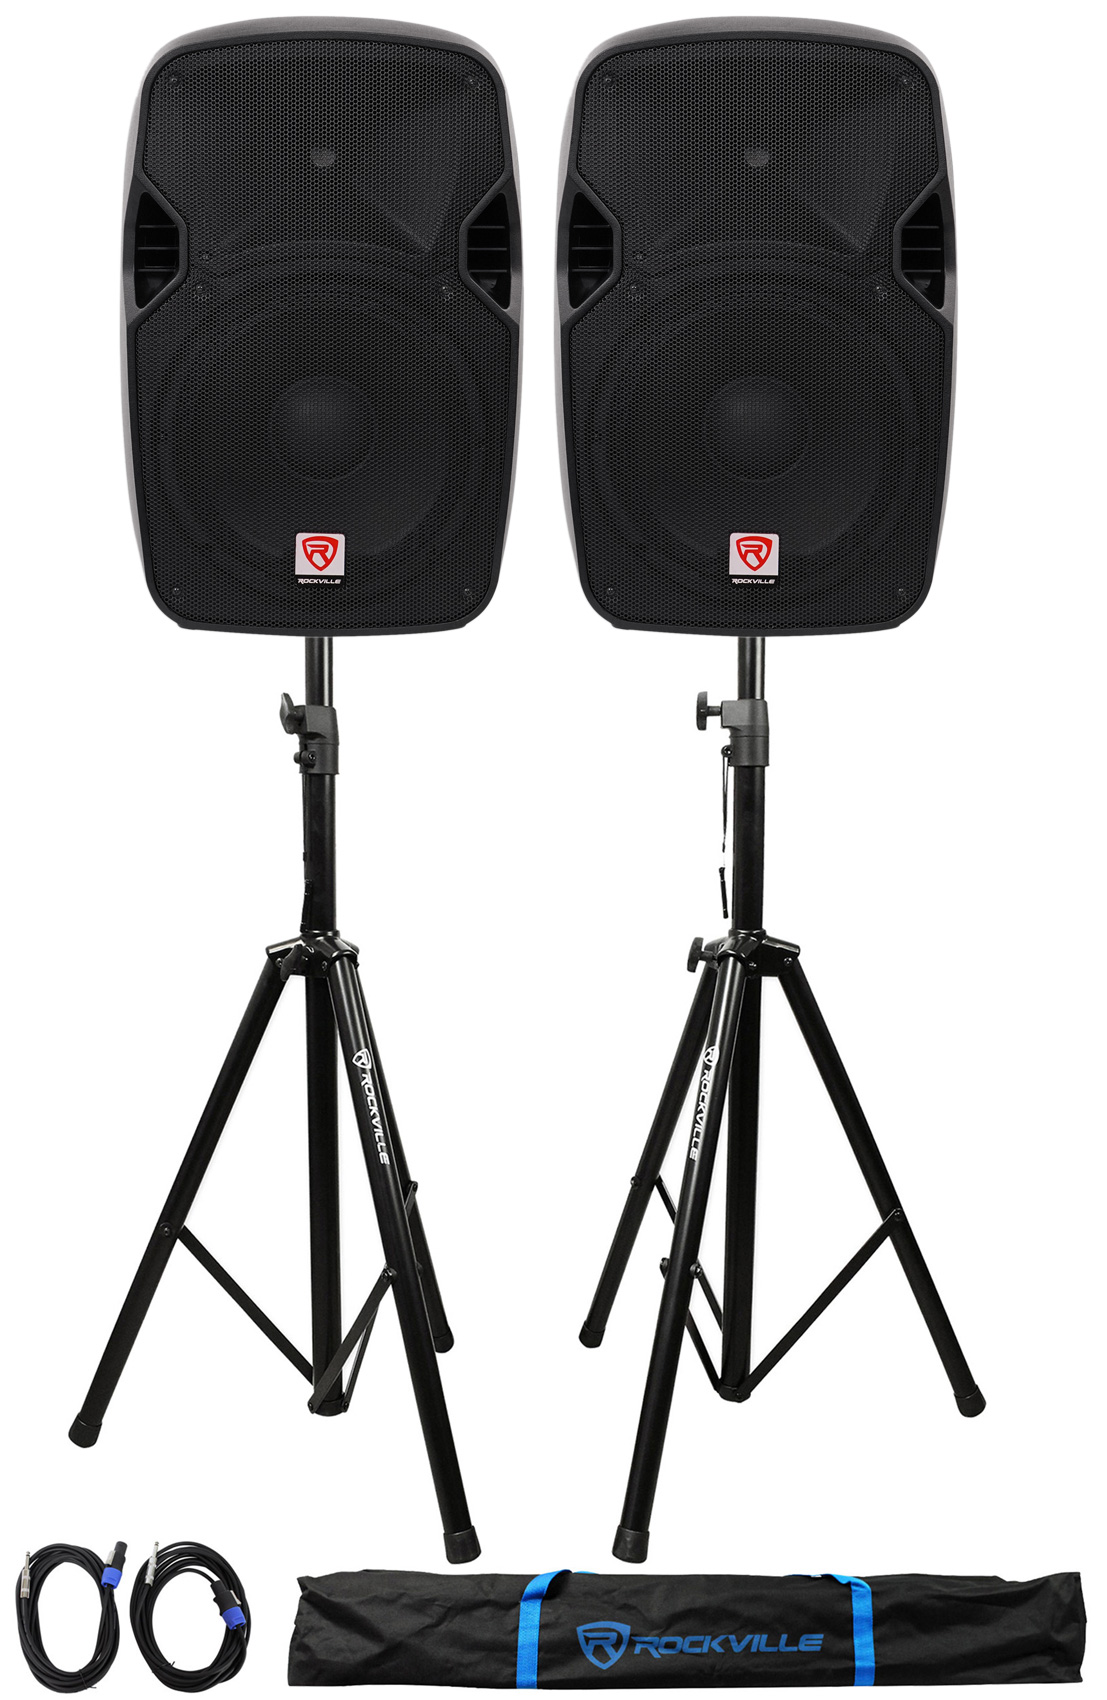 (2) Rockville SPGN124 12" Passive 2400W DJ PA Speakers+Stands+Cables+Carry Bag